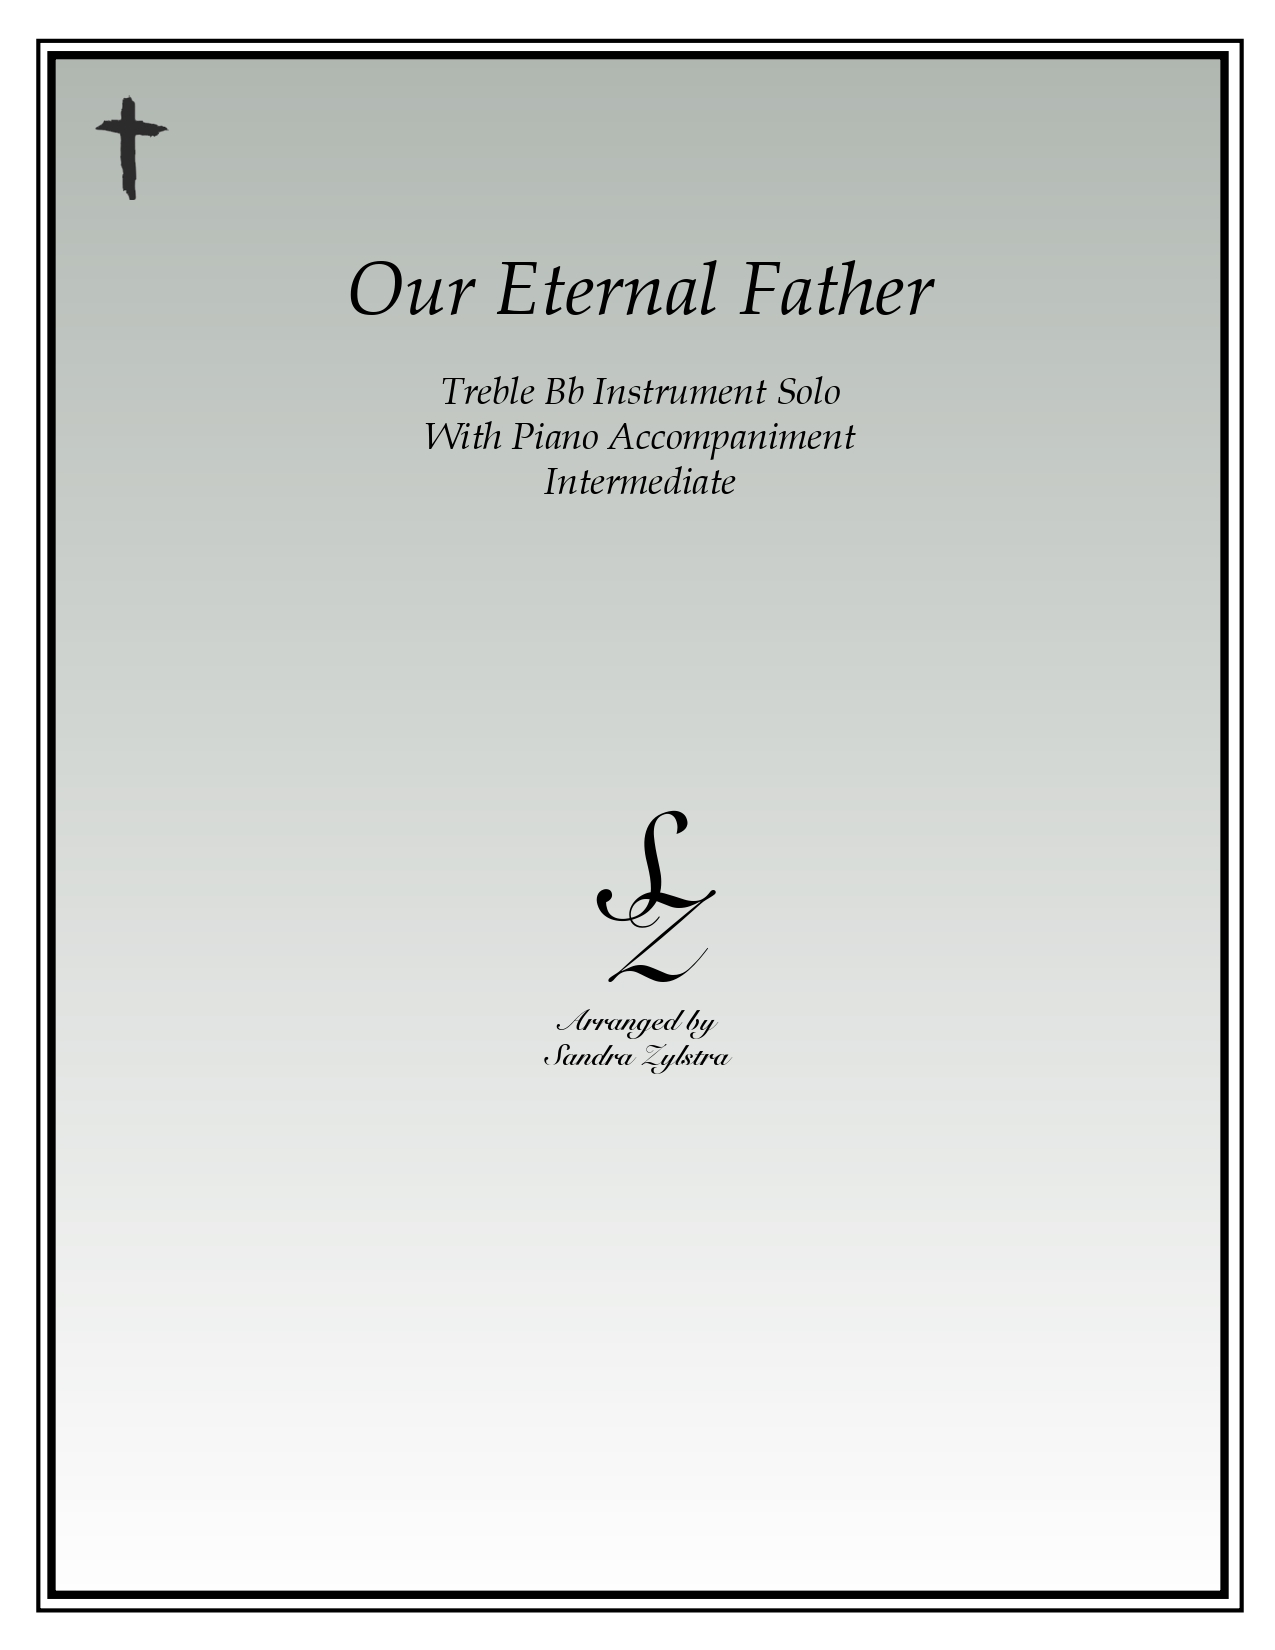 Our Eternal Father treble Bb instrument solo part cover page 00011